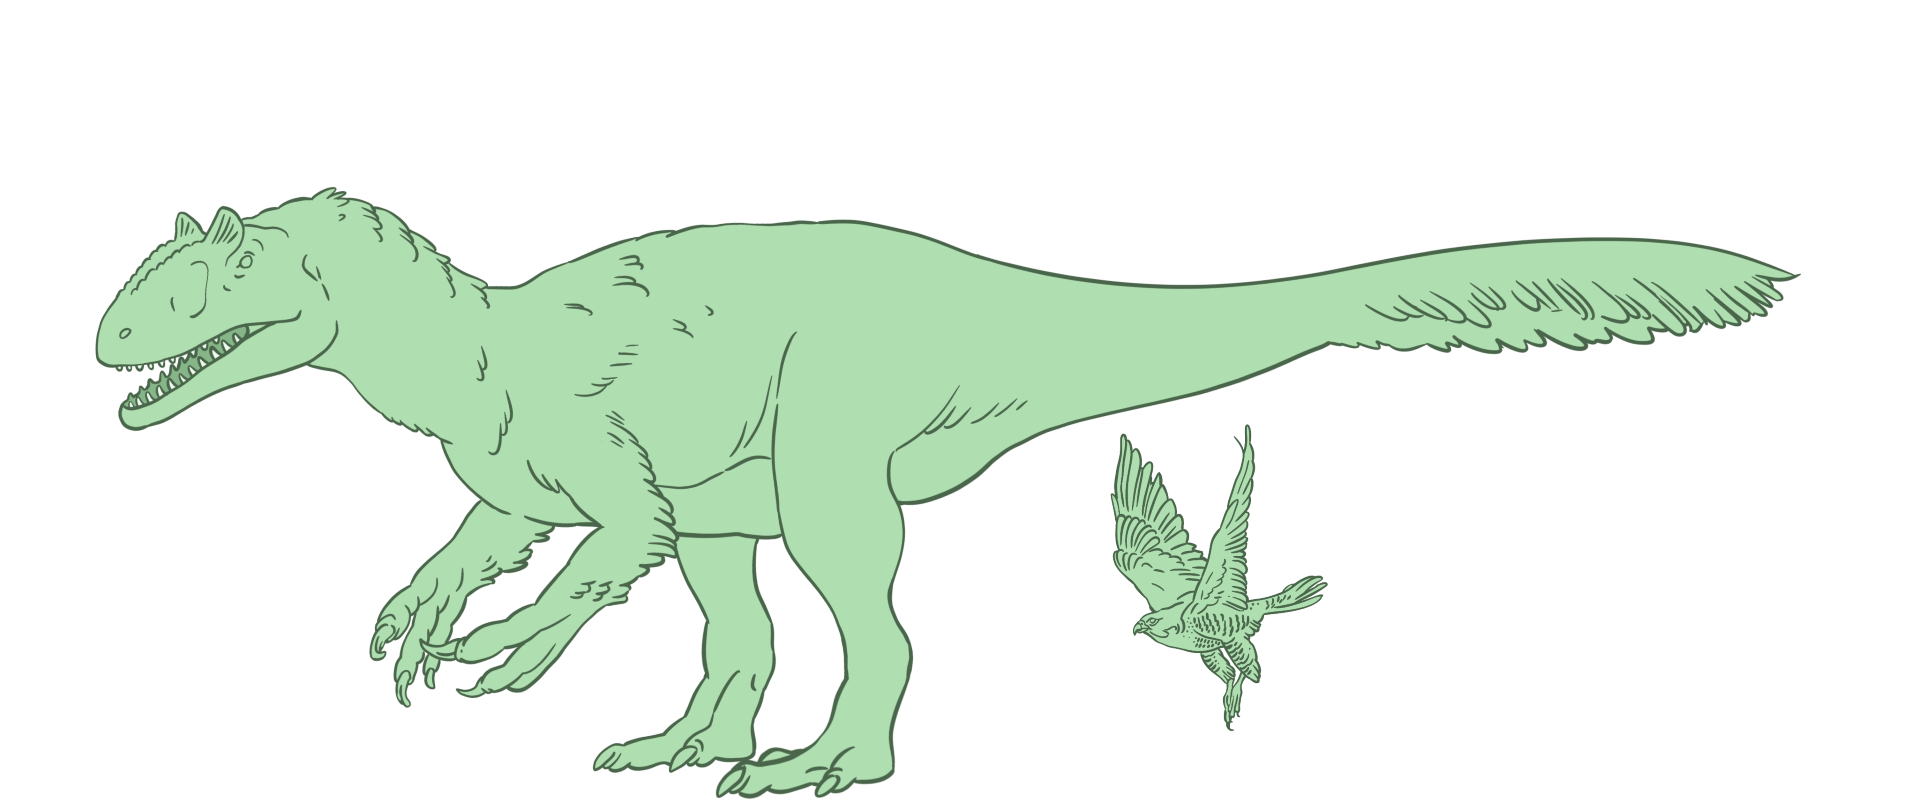 A drawing of a sharp-toothed, two legged meat eater with small clawed arms. Beneath it is a drawing of a peregrine falcon in flight. Both of these are theropod dinosaurs.